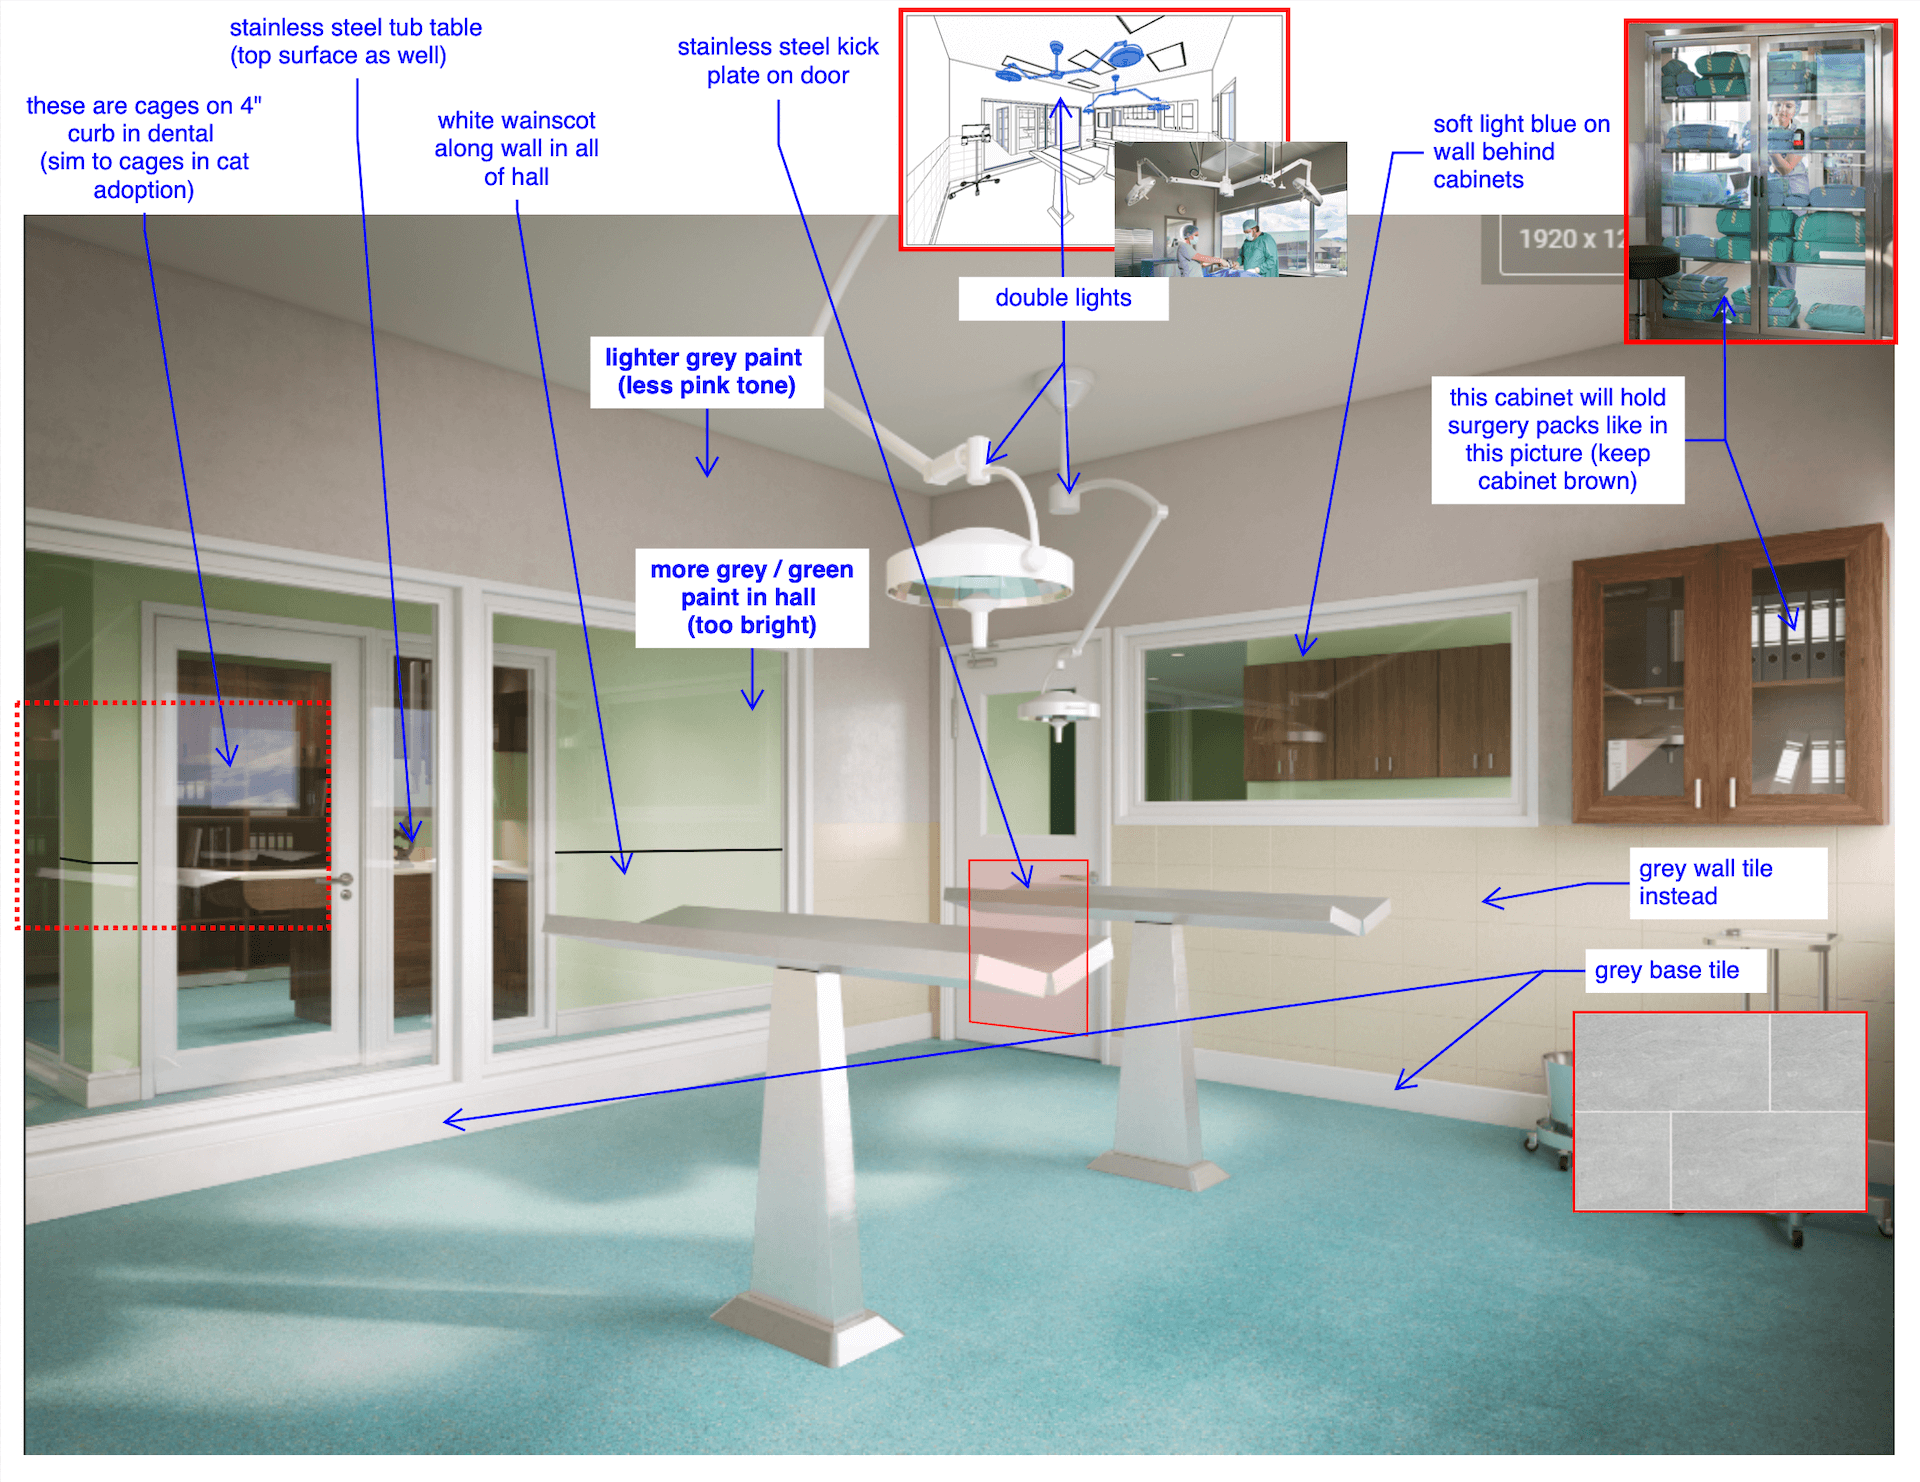 Notes in the First Round of Revision of Surgery Room Visualization